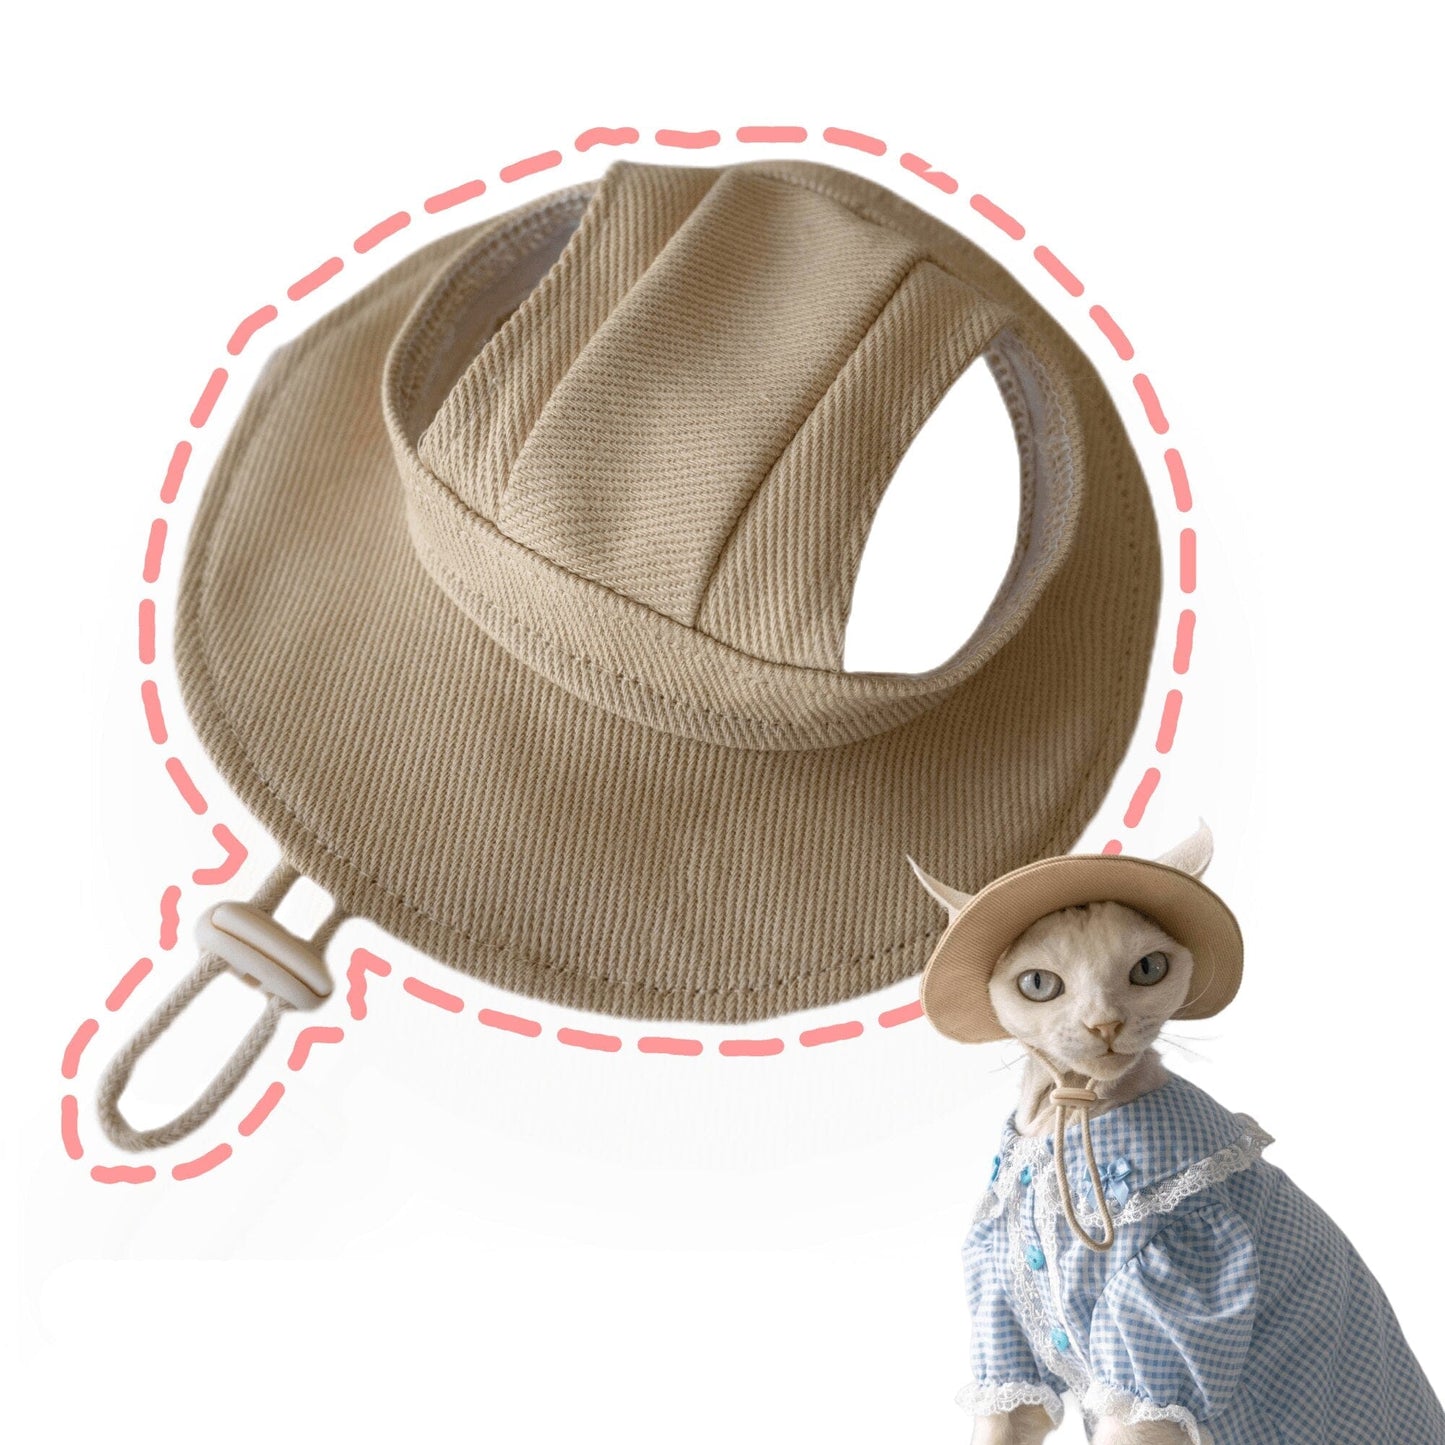 Sunscreen cat hat with adjustable sizing for trips